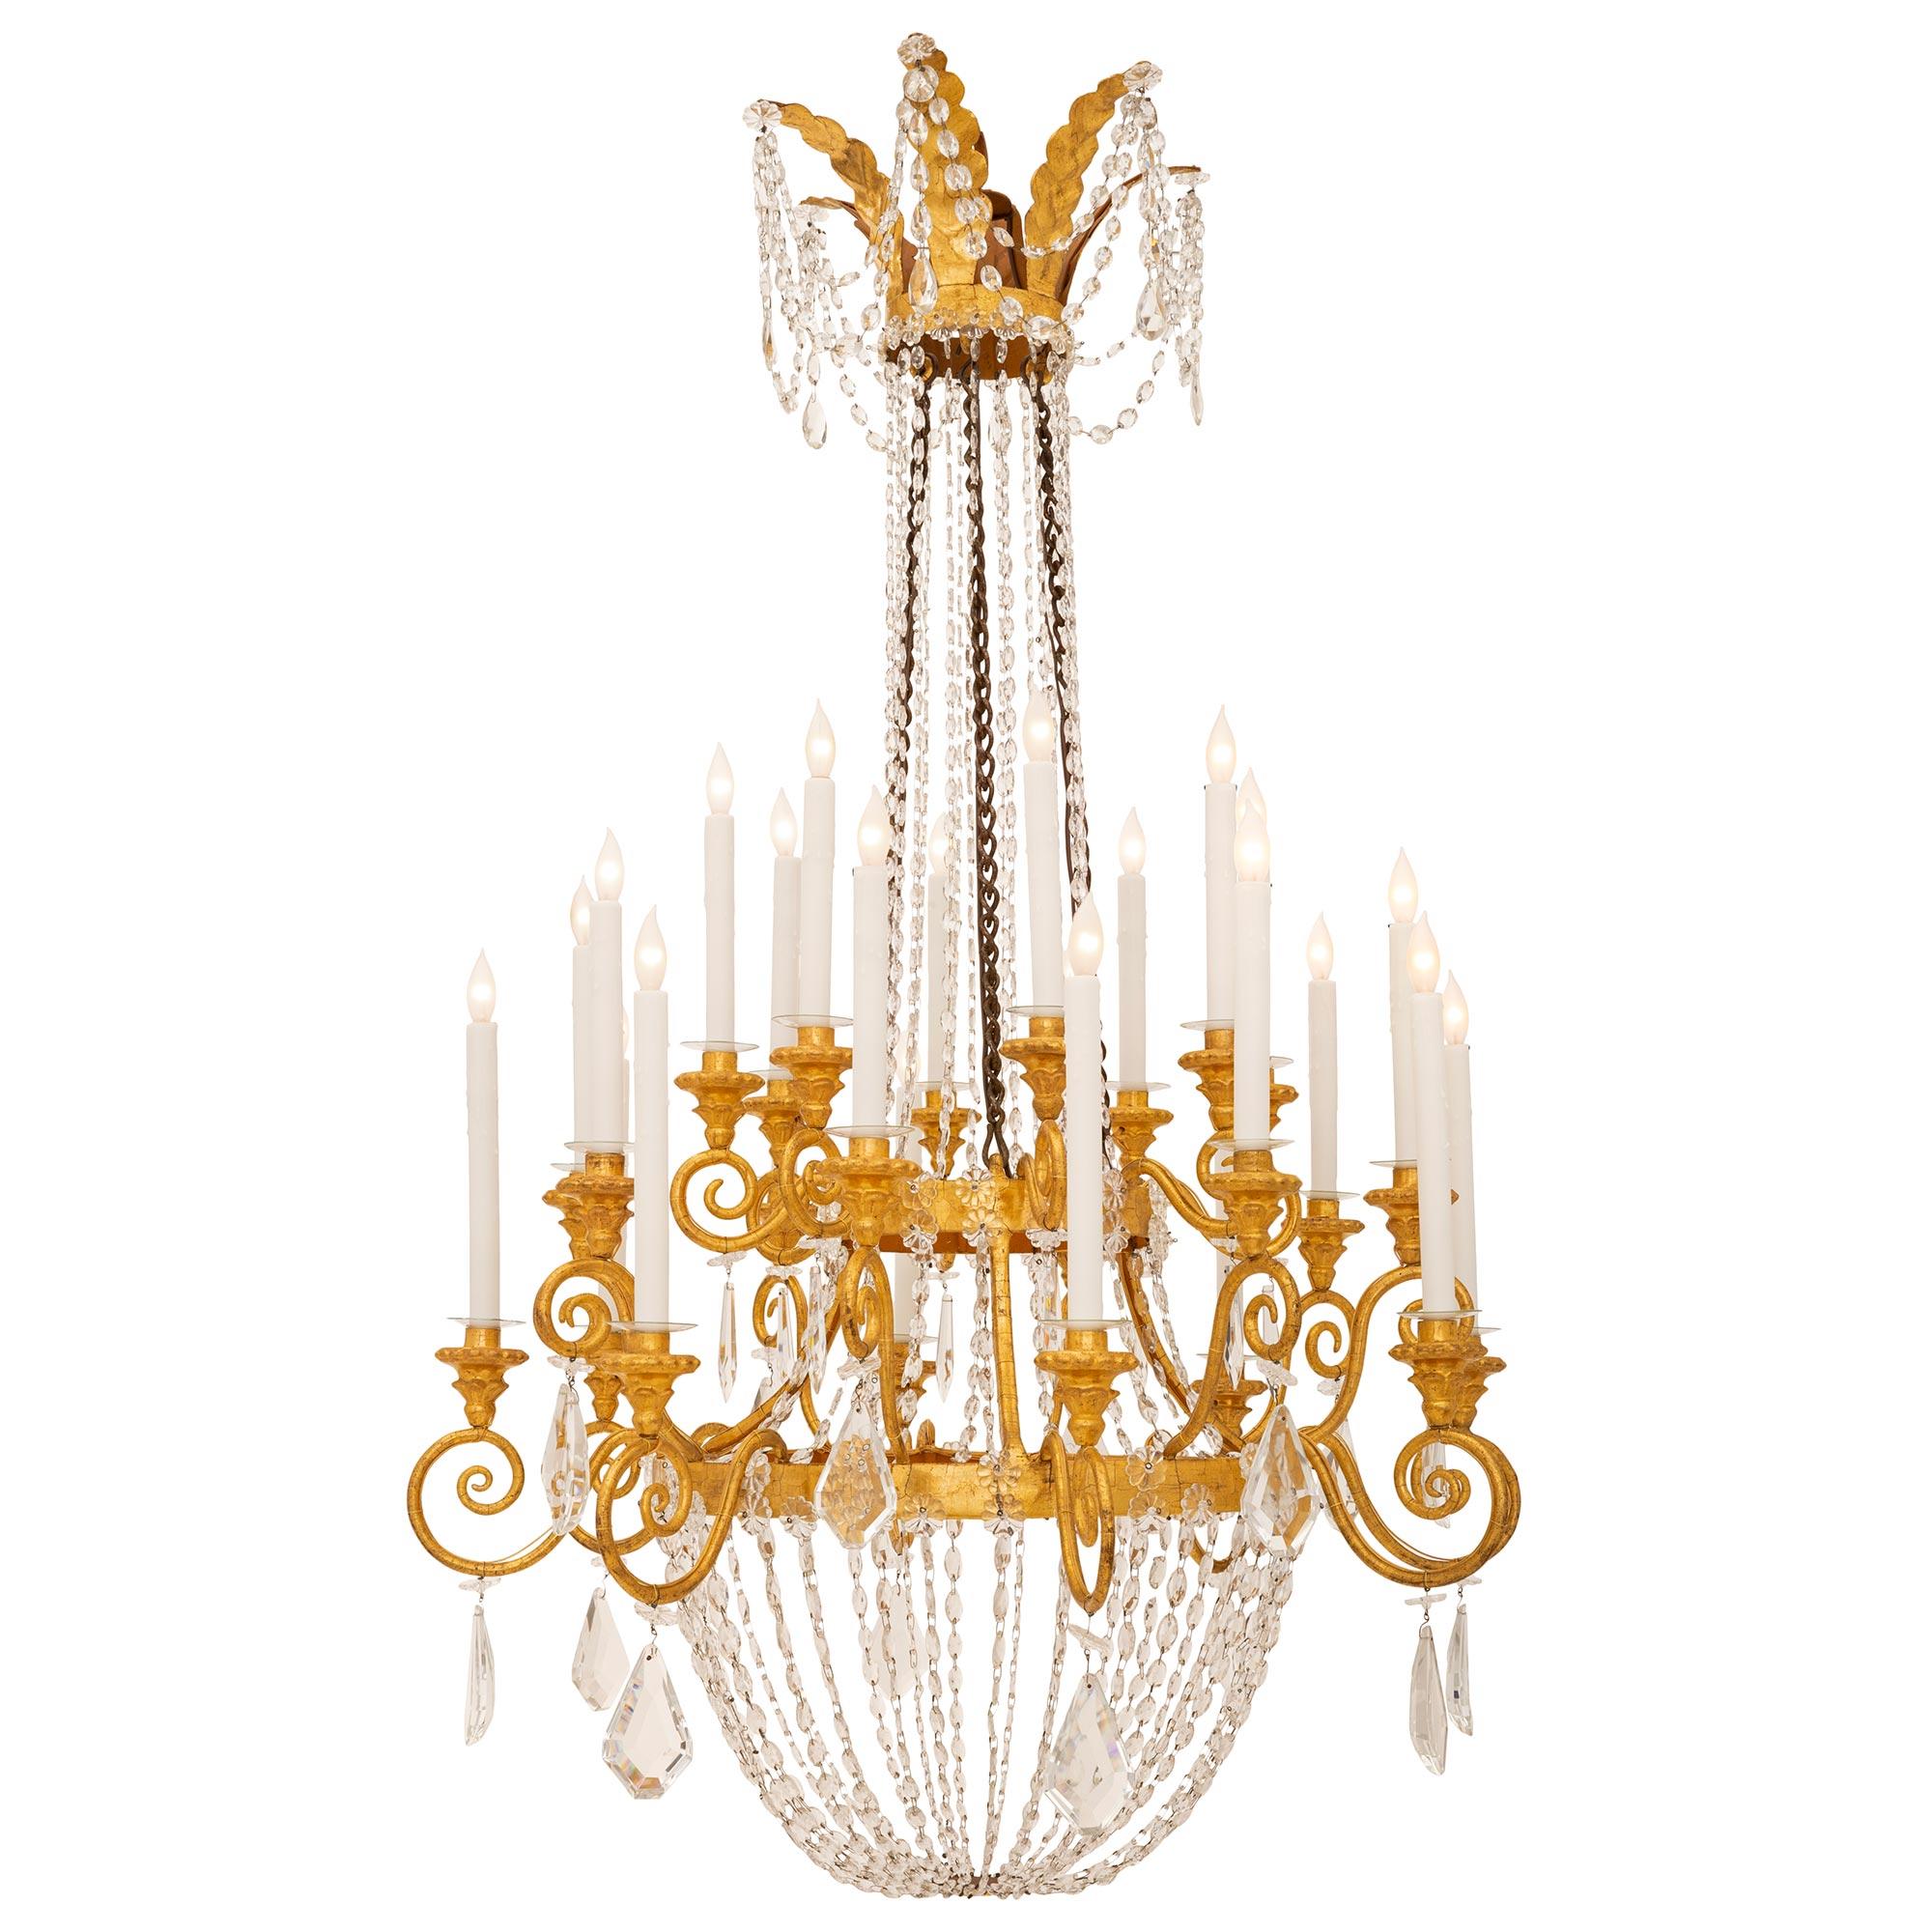 A stunning and large scale Italian 19th century Neo-Classical st. gilt metal, giltwood, iron and crystal chandelier. The twenty four arm chandelier is centered by a fine mottled bottom foliate reserve below an elegant array of lightly curved swaging